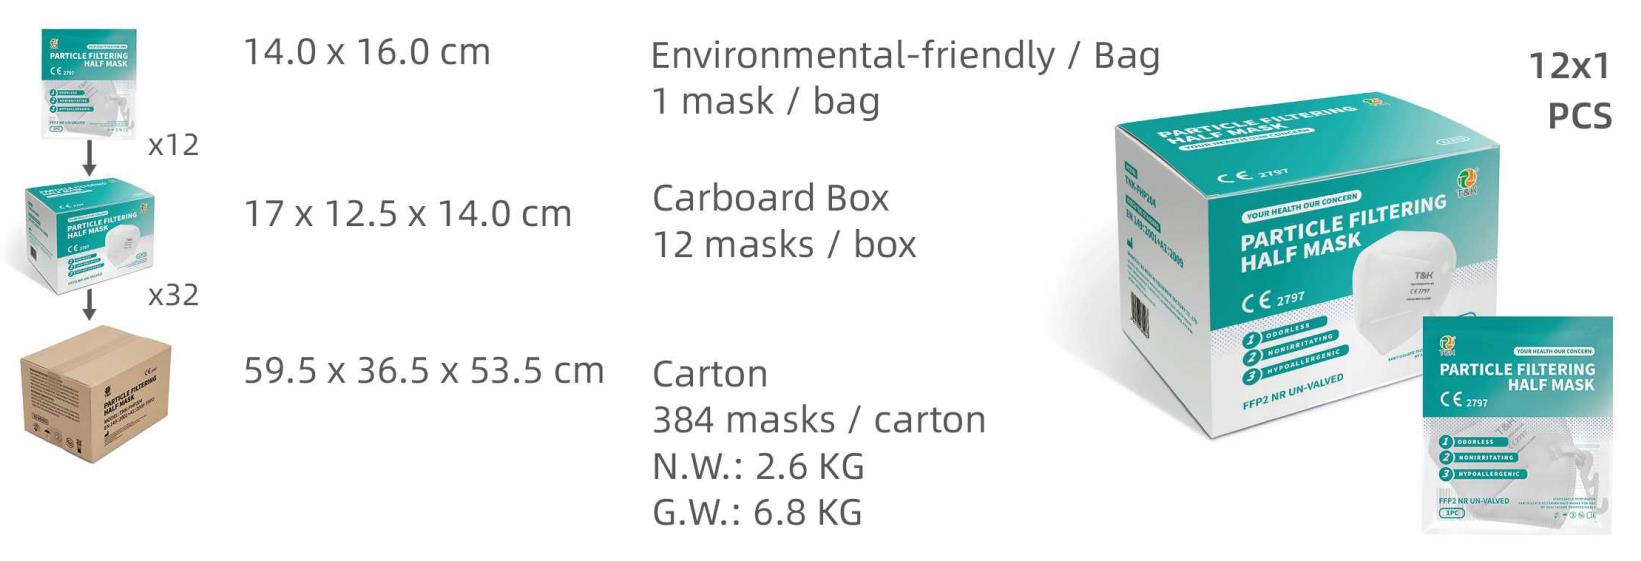 FFP2 Particle Filtering Half Mask (Color Printing Package)